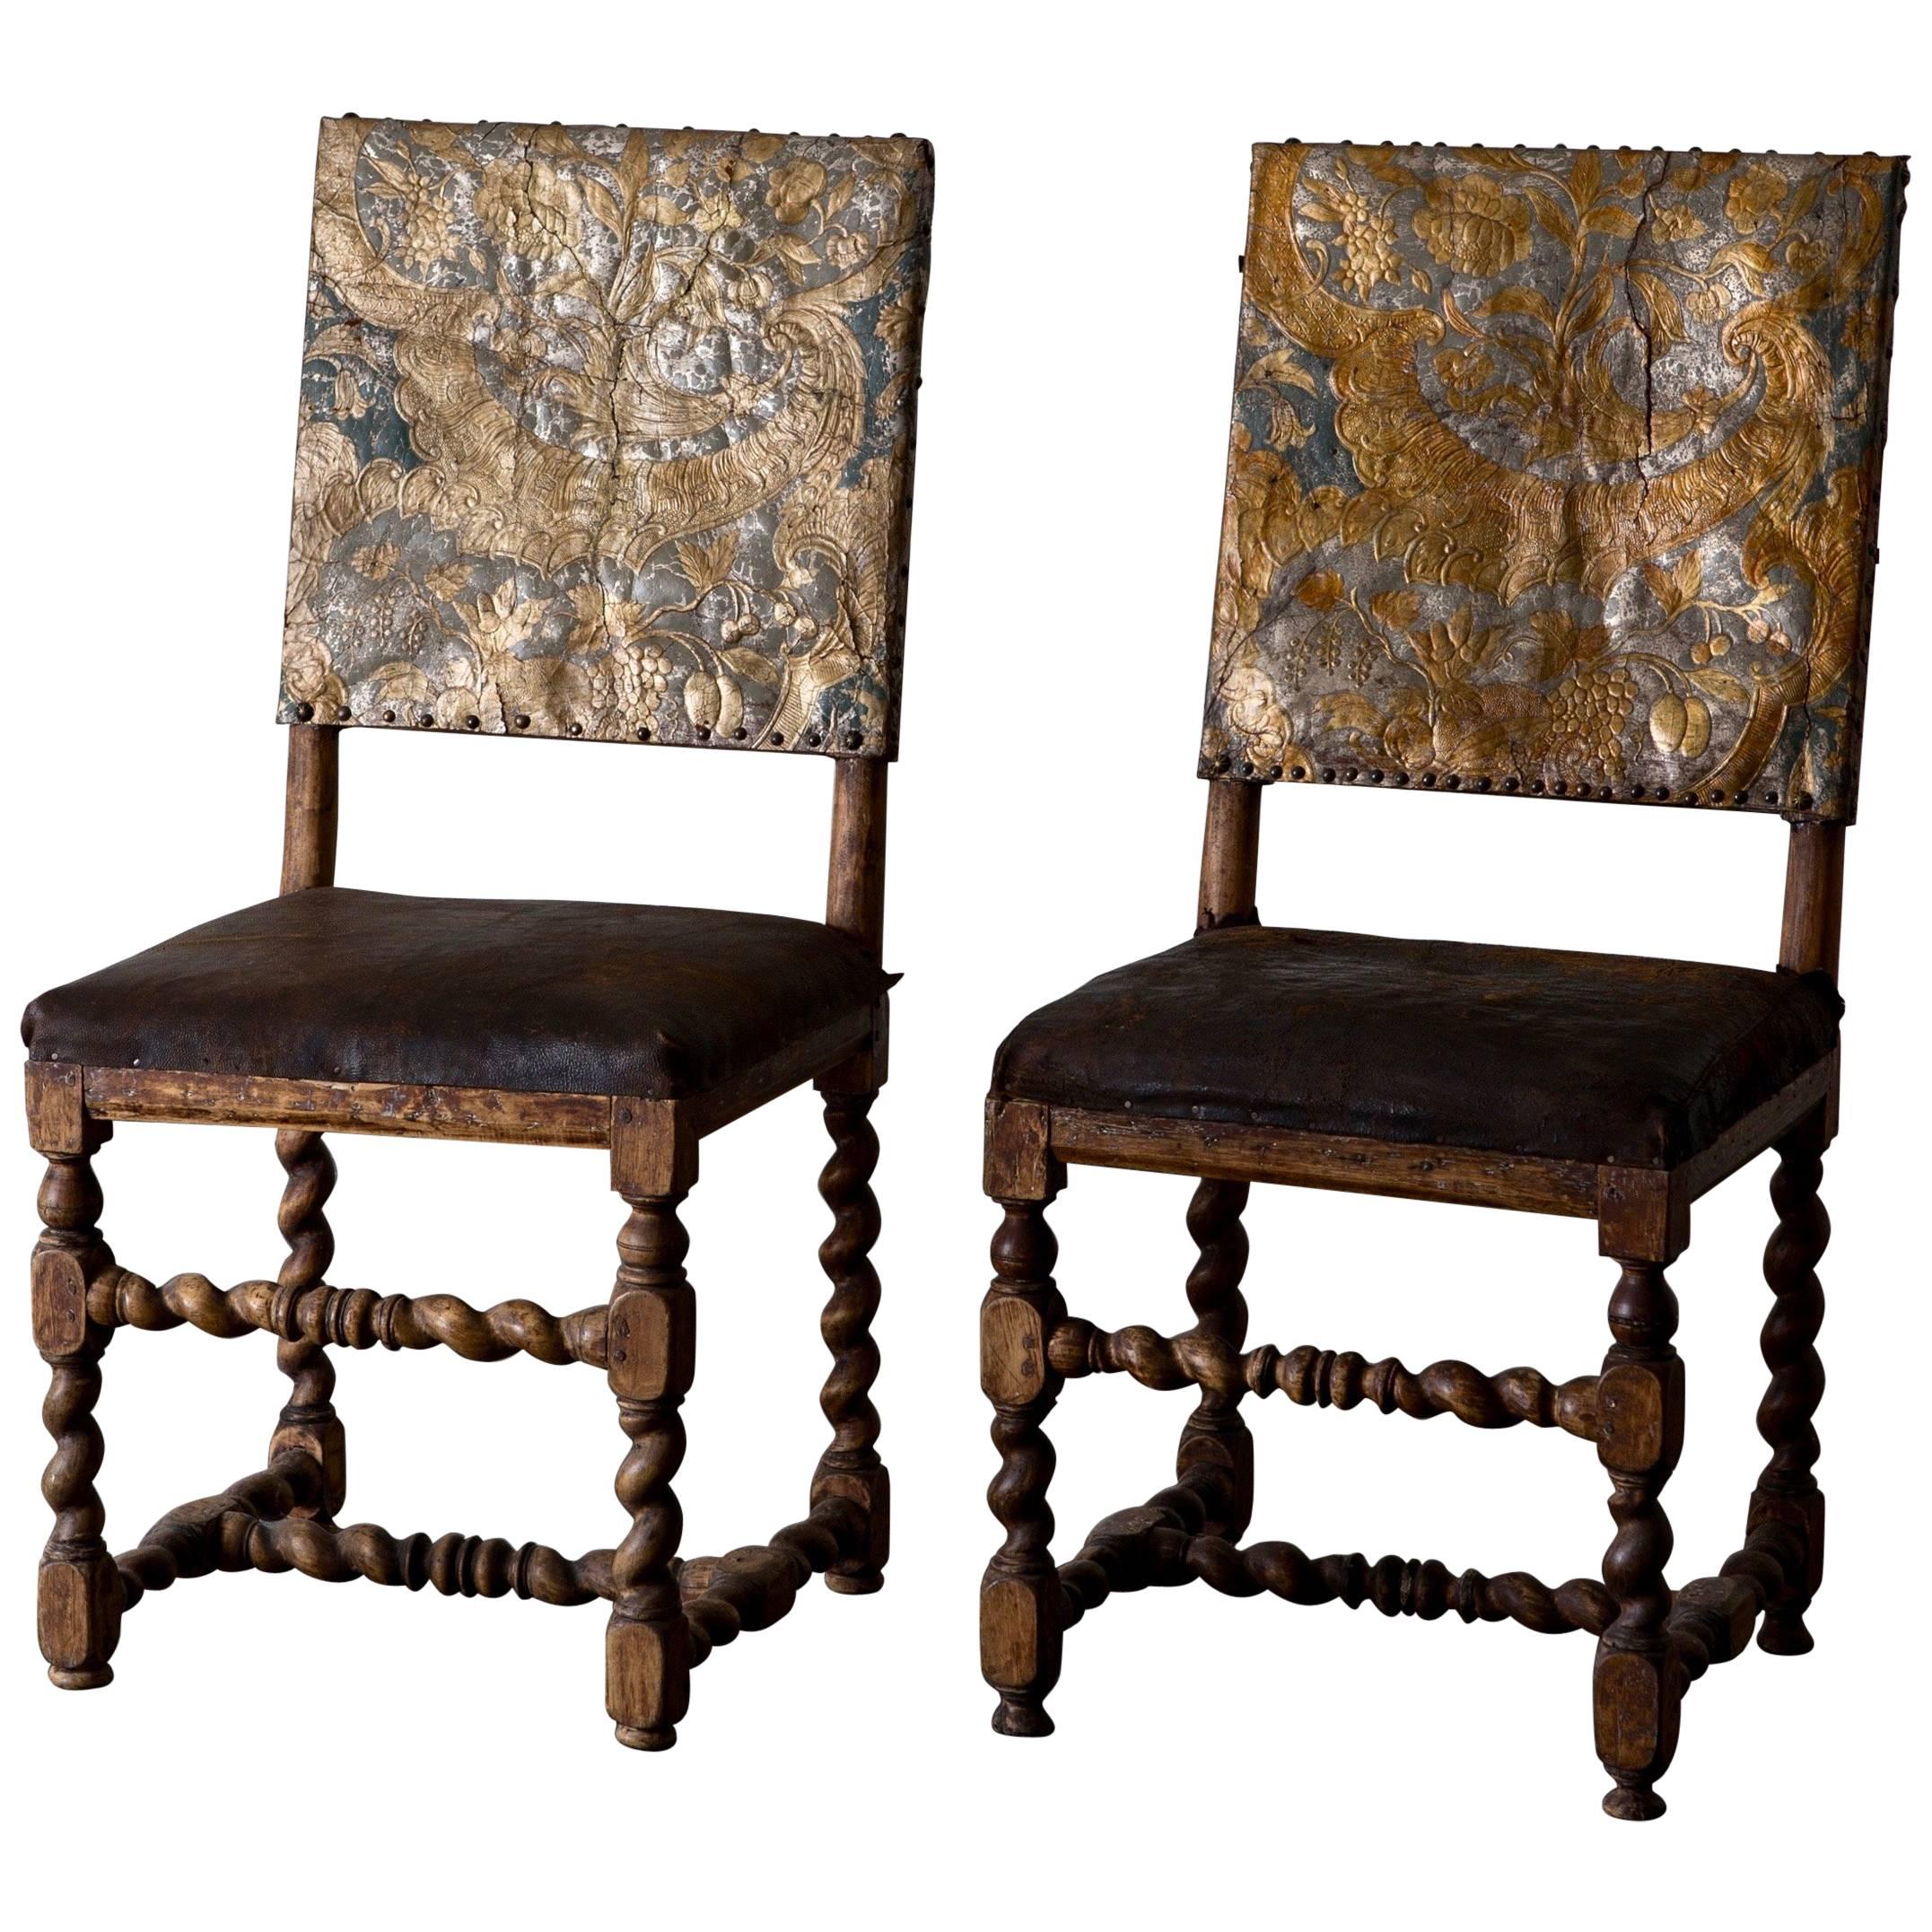 Chairs Pair Swedish Original Gilded Leather Baroque Period 18th Century Sweden